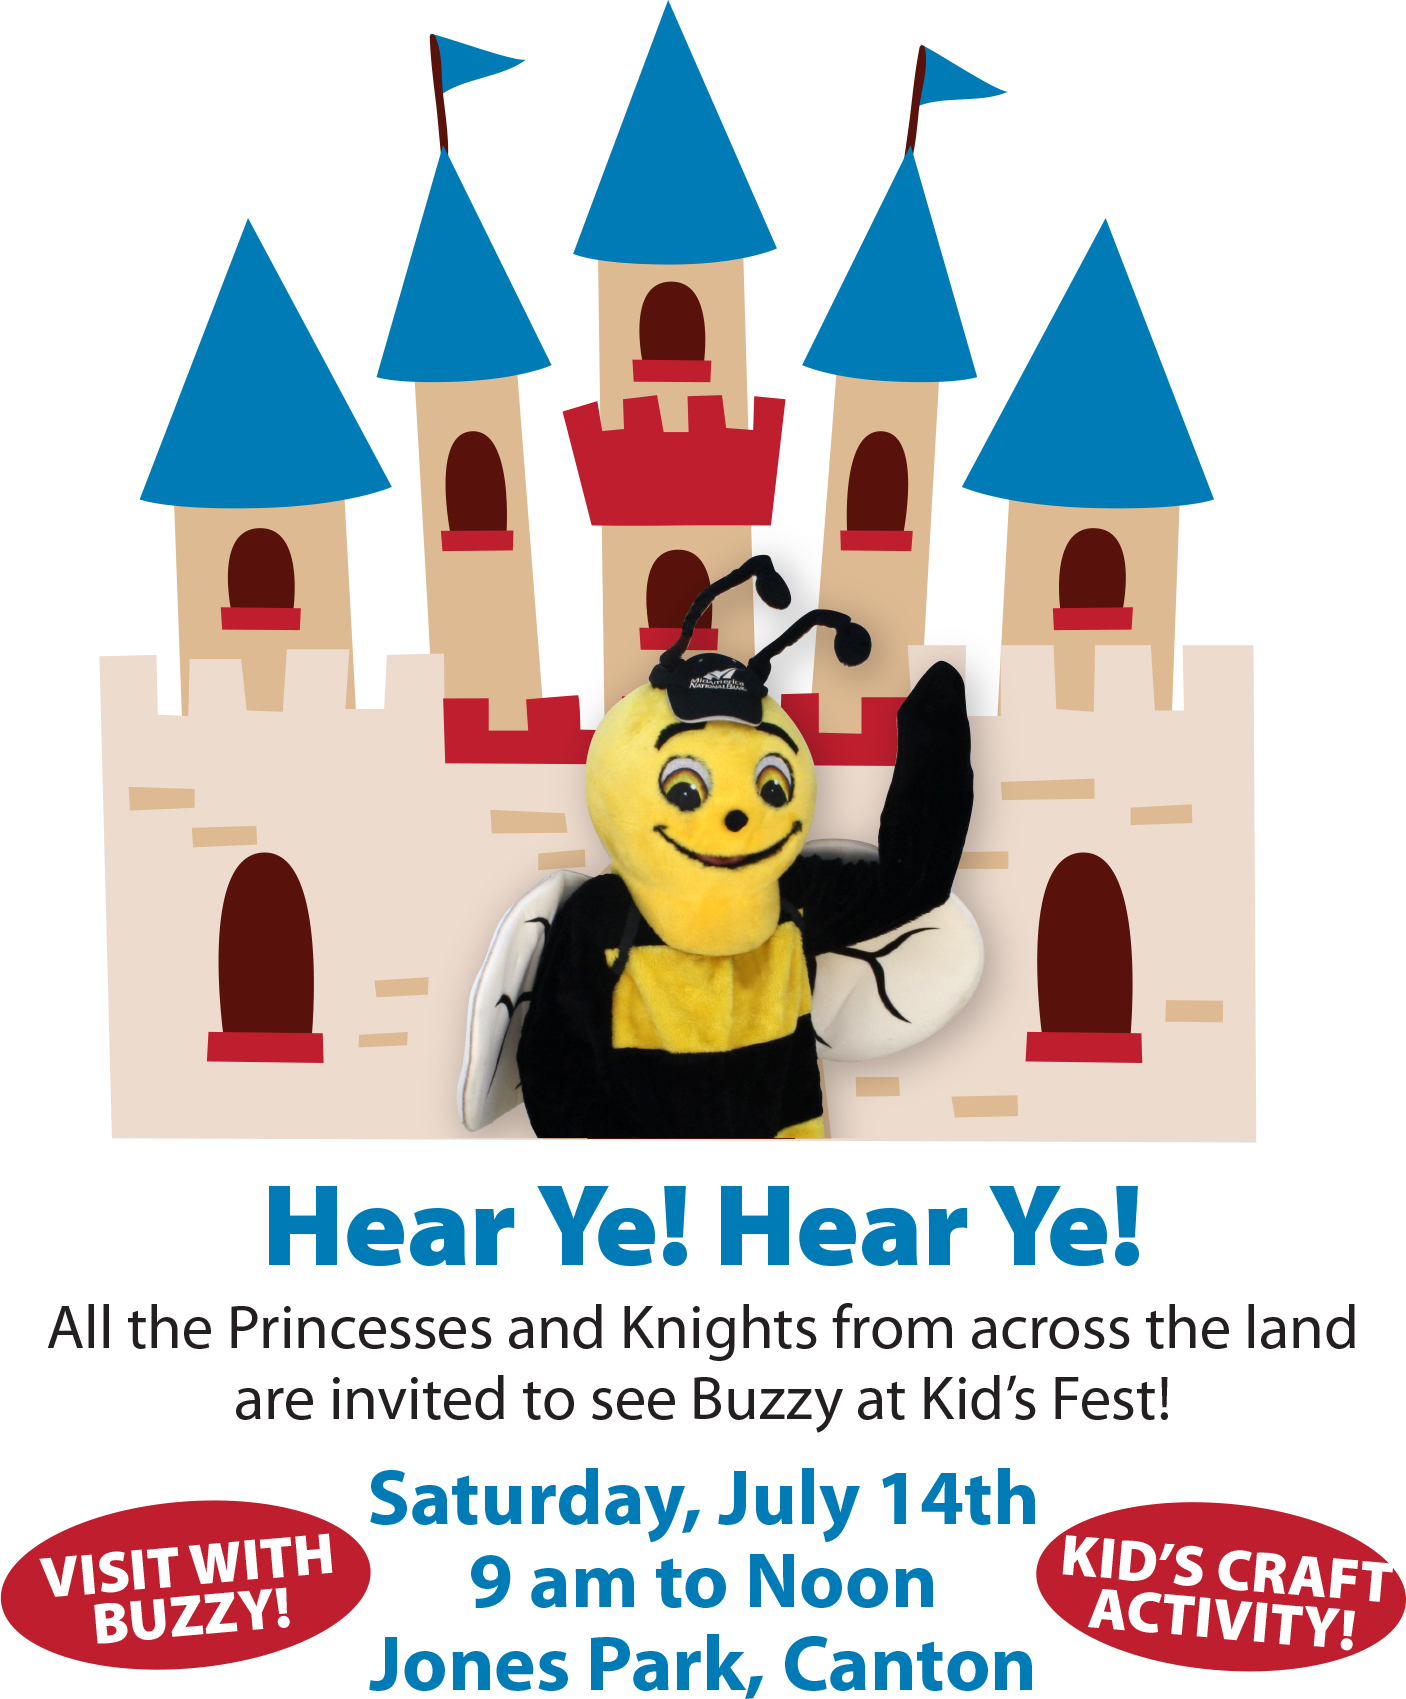 See Buzzy at Kid's Fest on July 14